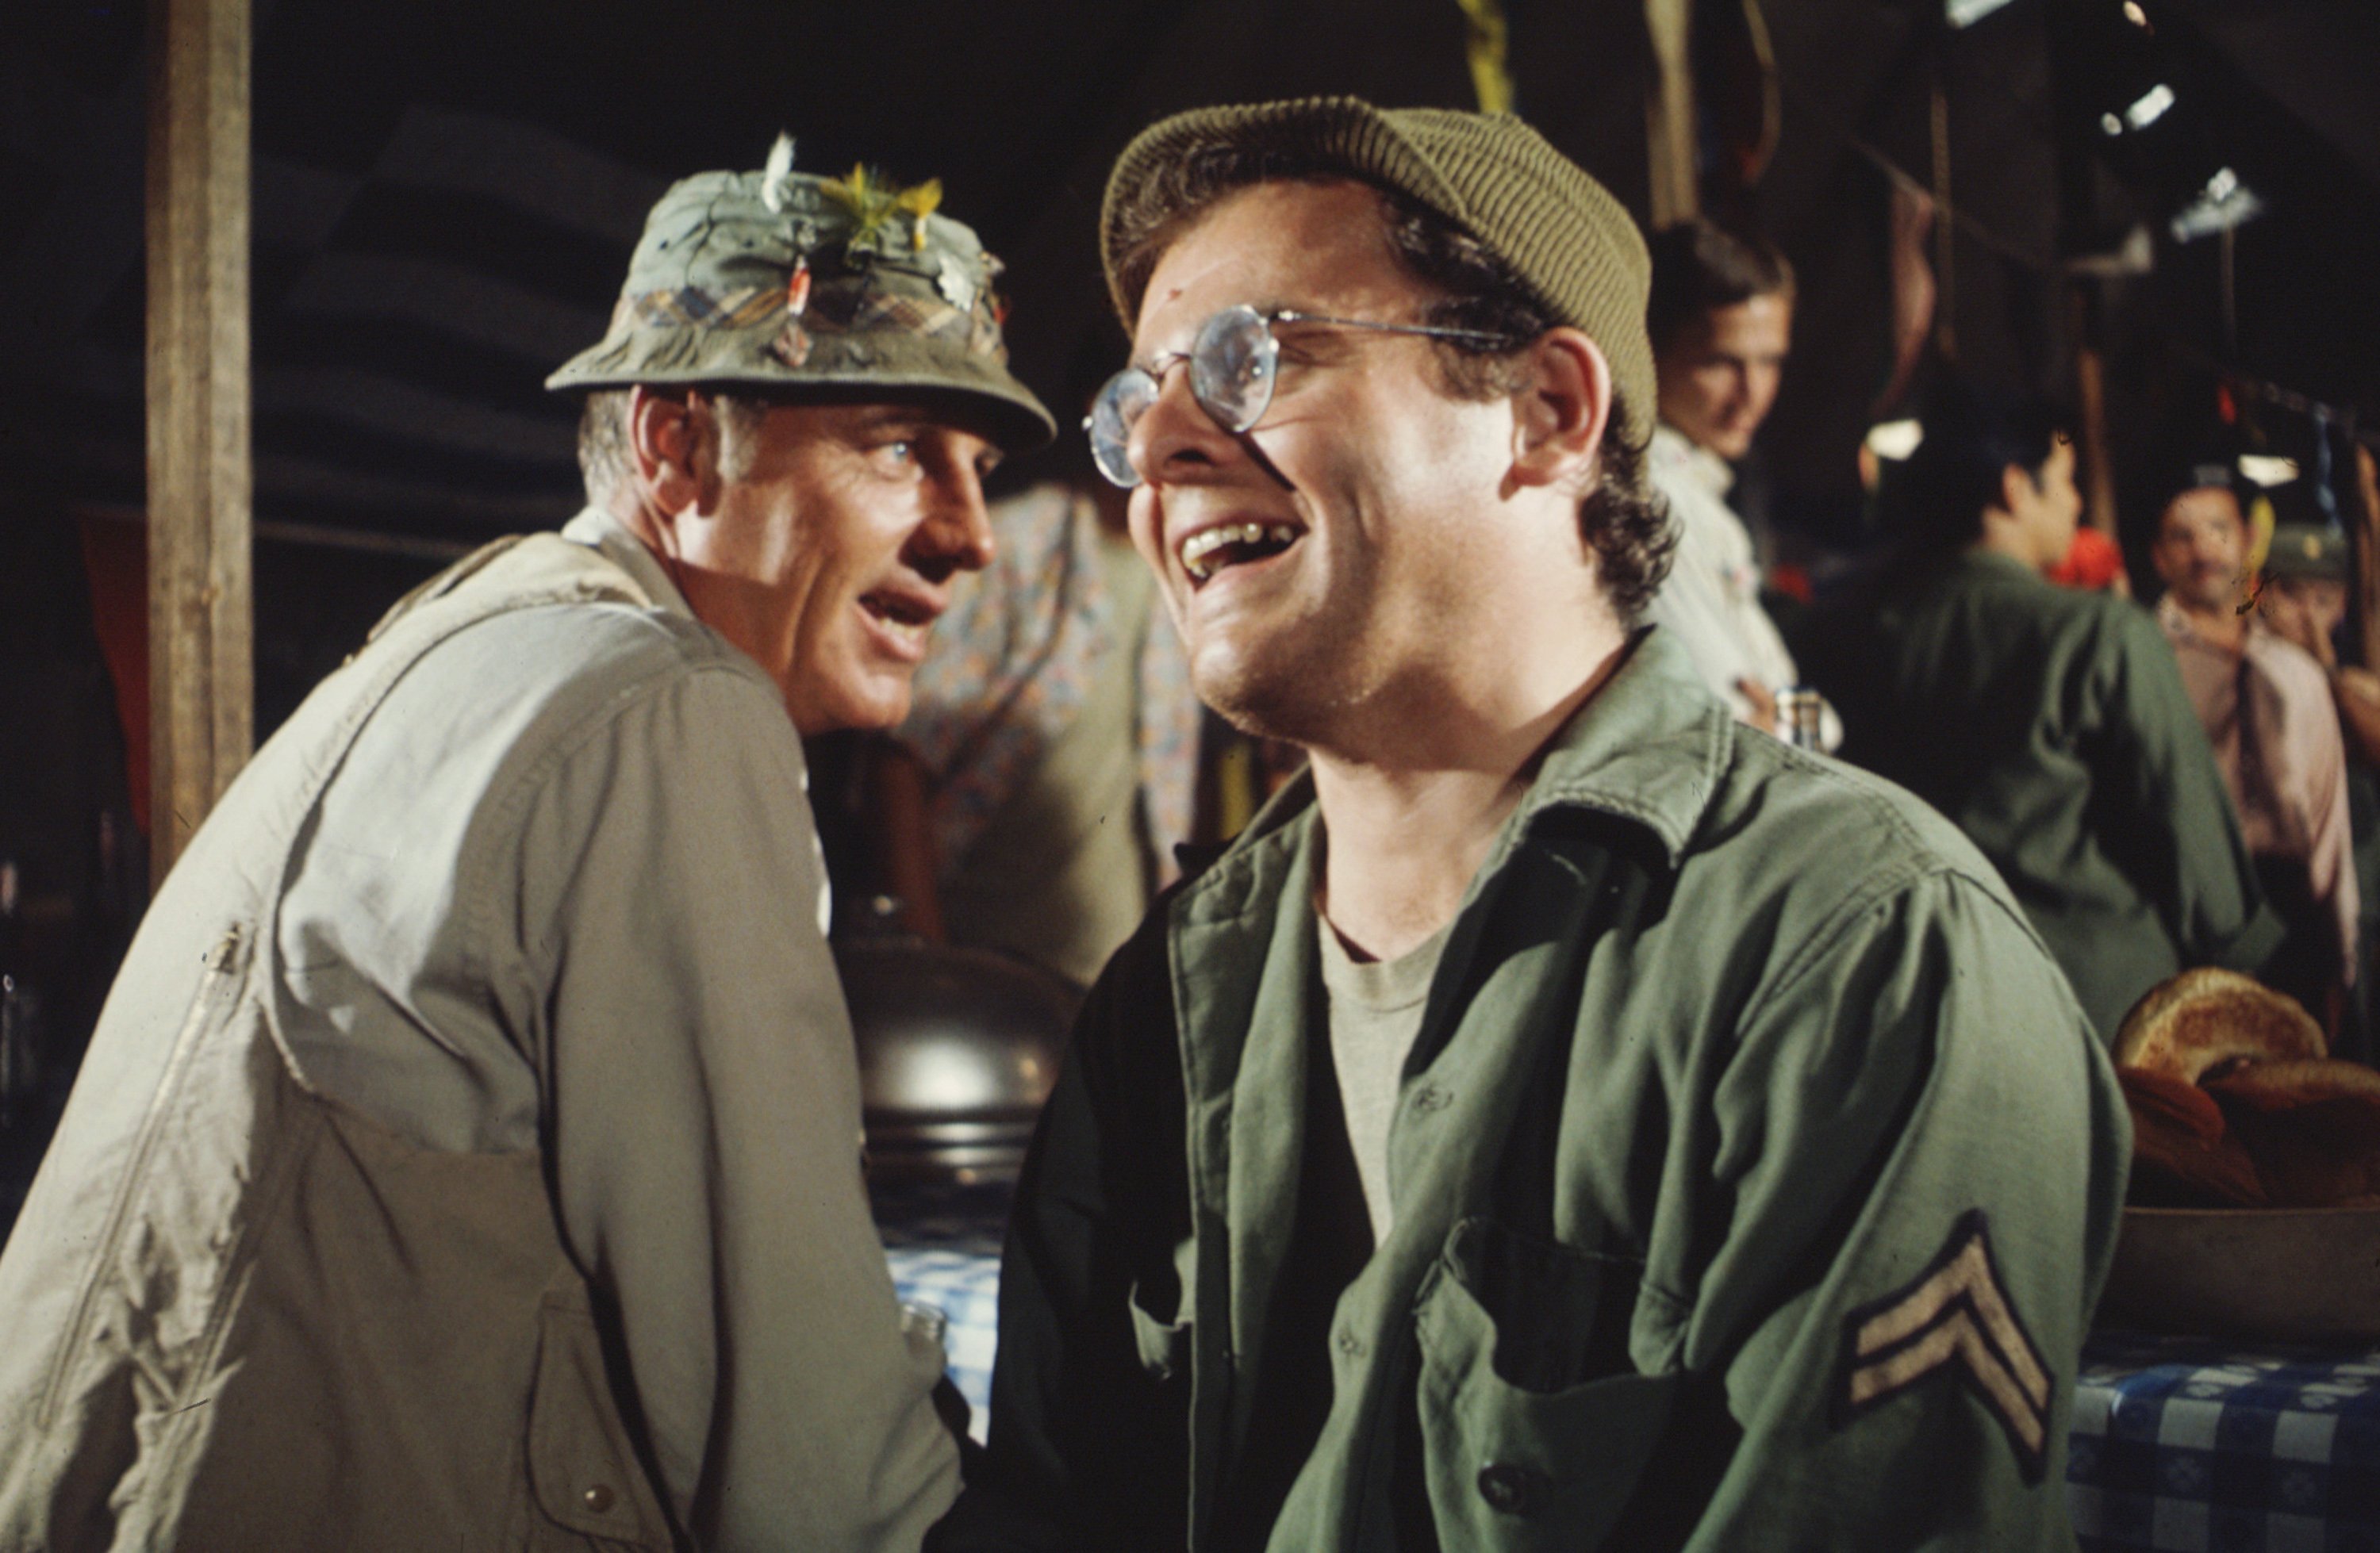 McLean Stevenson as Lt. Col. Henry Blake, and Gary Burghoff, as Corporal Walter Radar O'Reilly, in from "M*A*S*H" in 1975 | Source: Getty Images